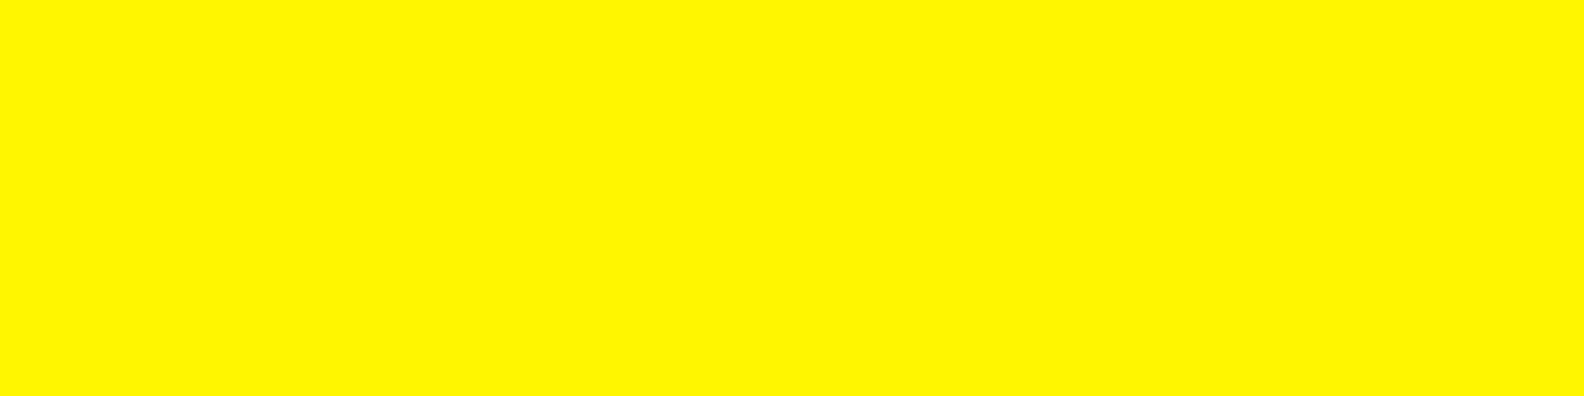 1584x396 Cadmium Yellow Solid Color Background